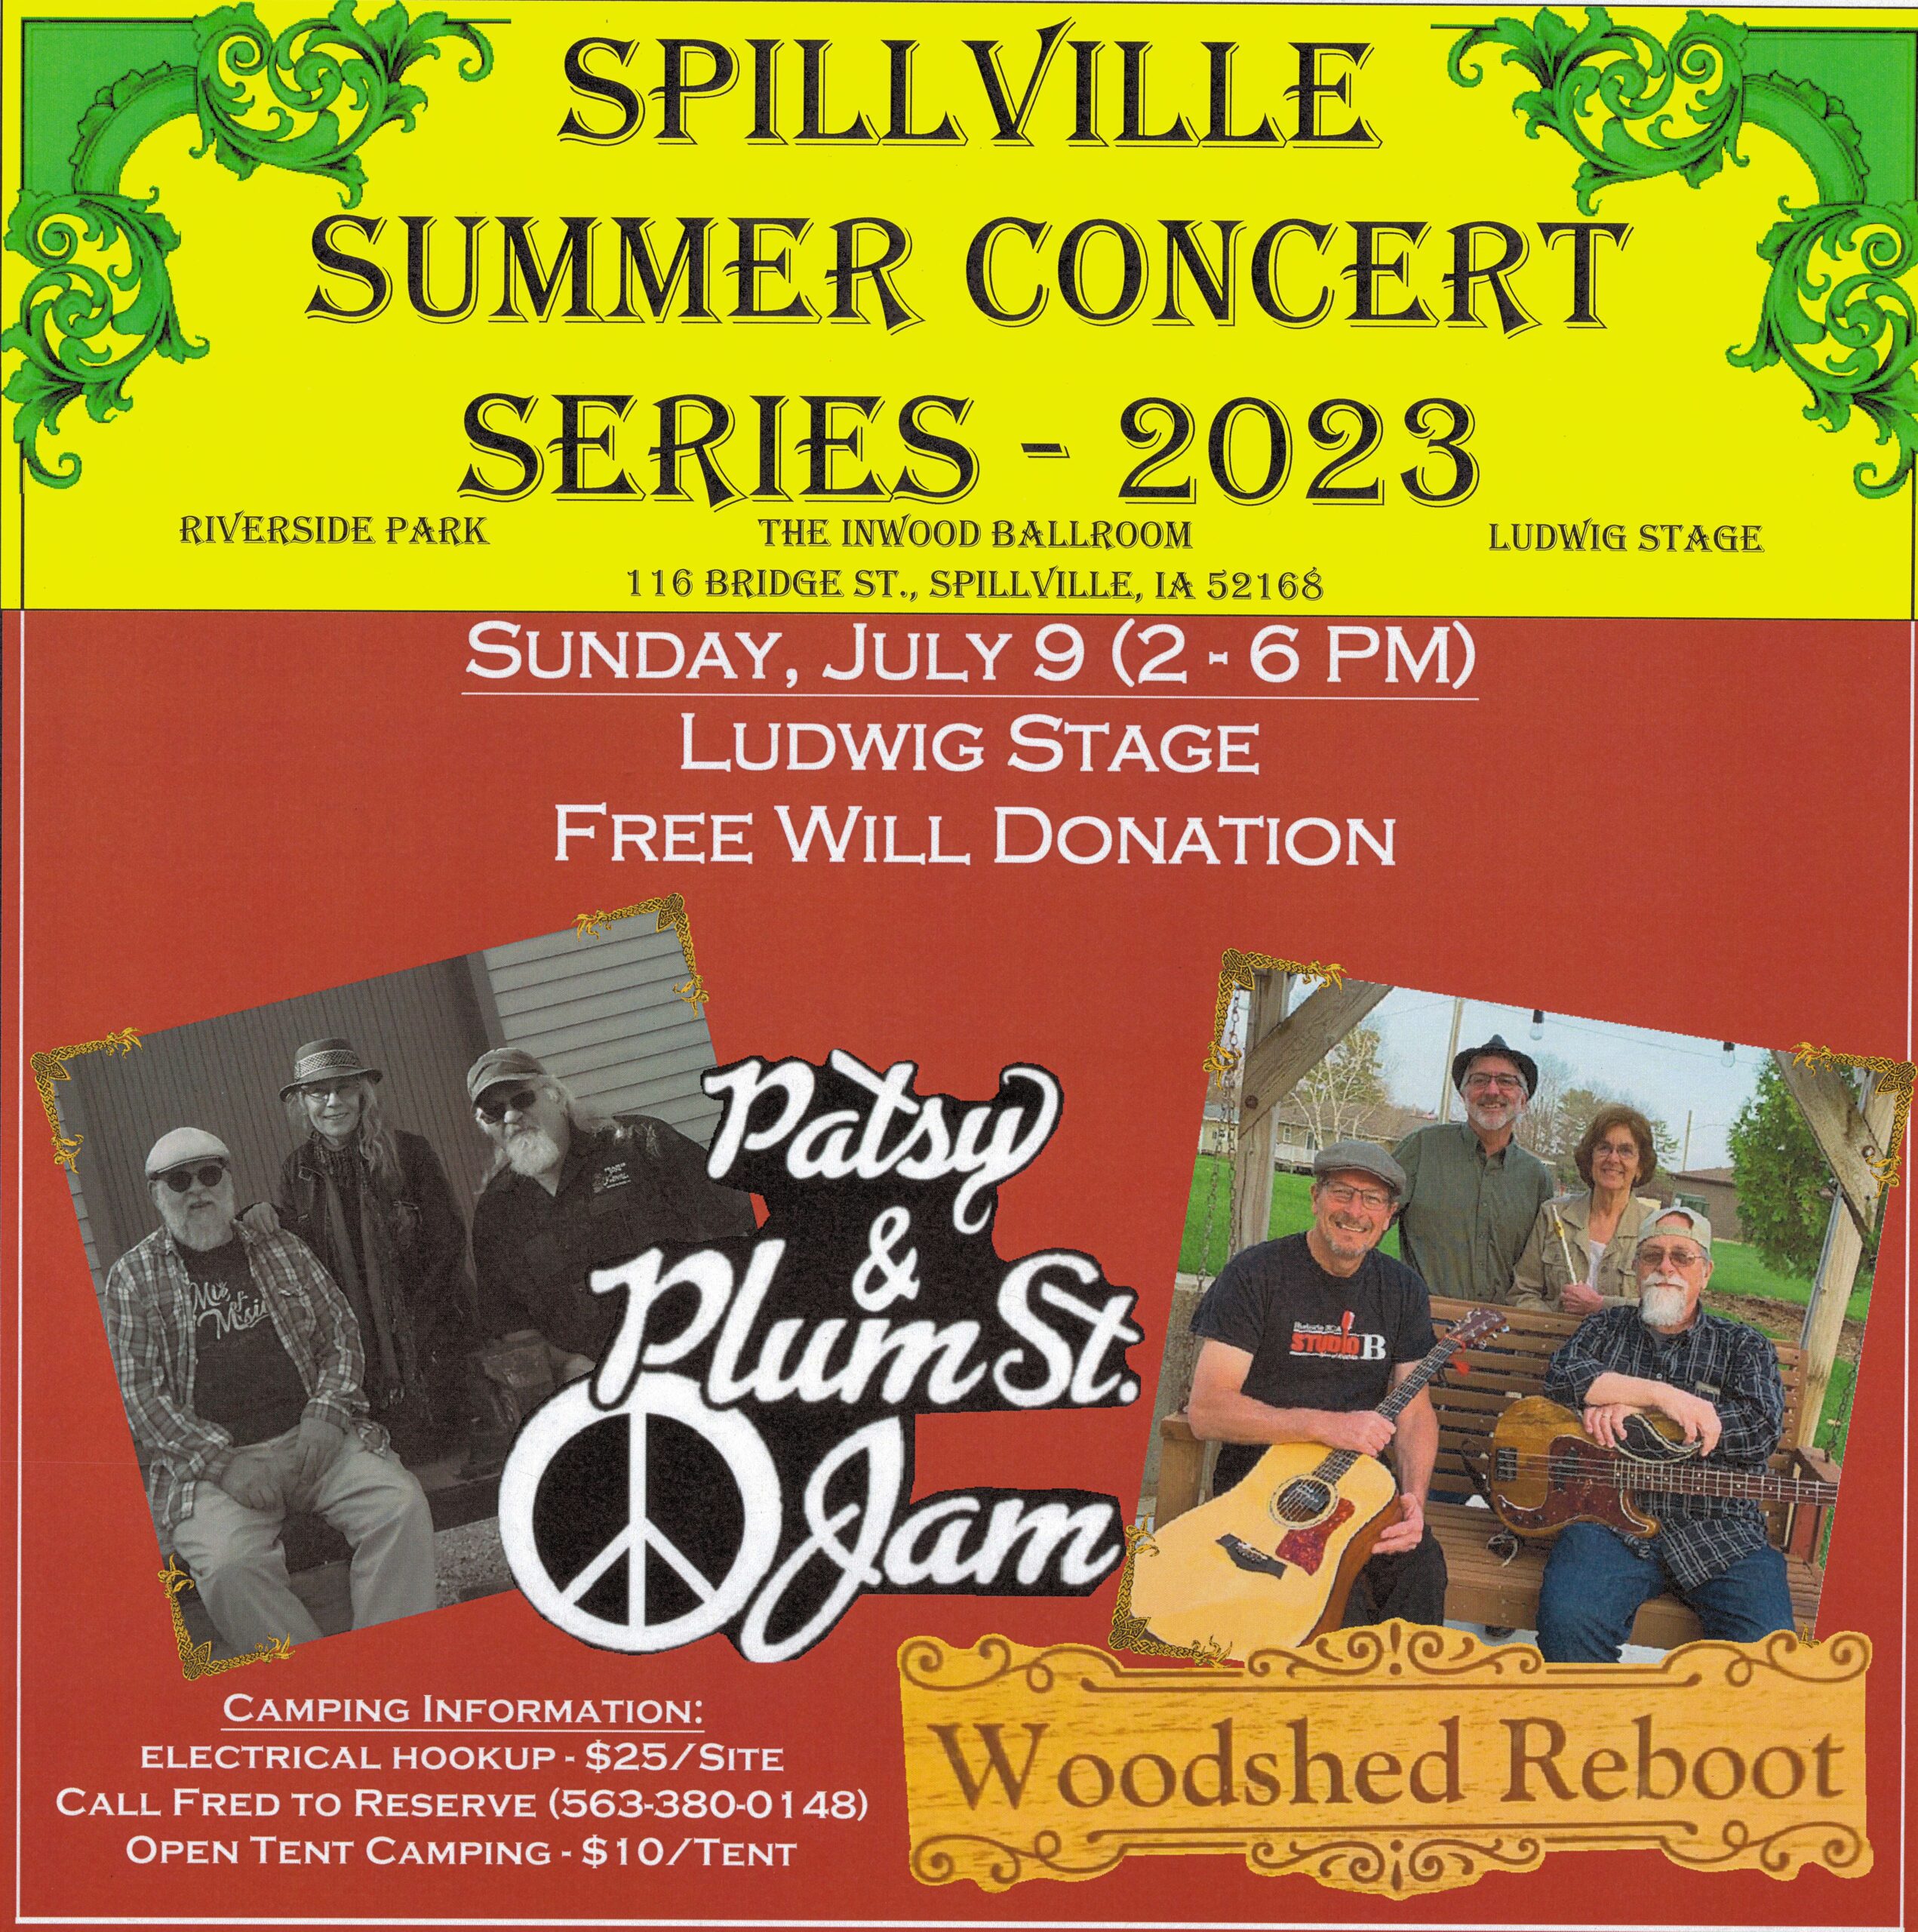 Spillville Summer Concert Series - Woodshed Reboot with Patsy & Plum St. Jam thumbnail